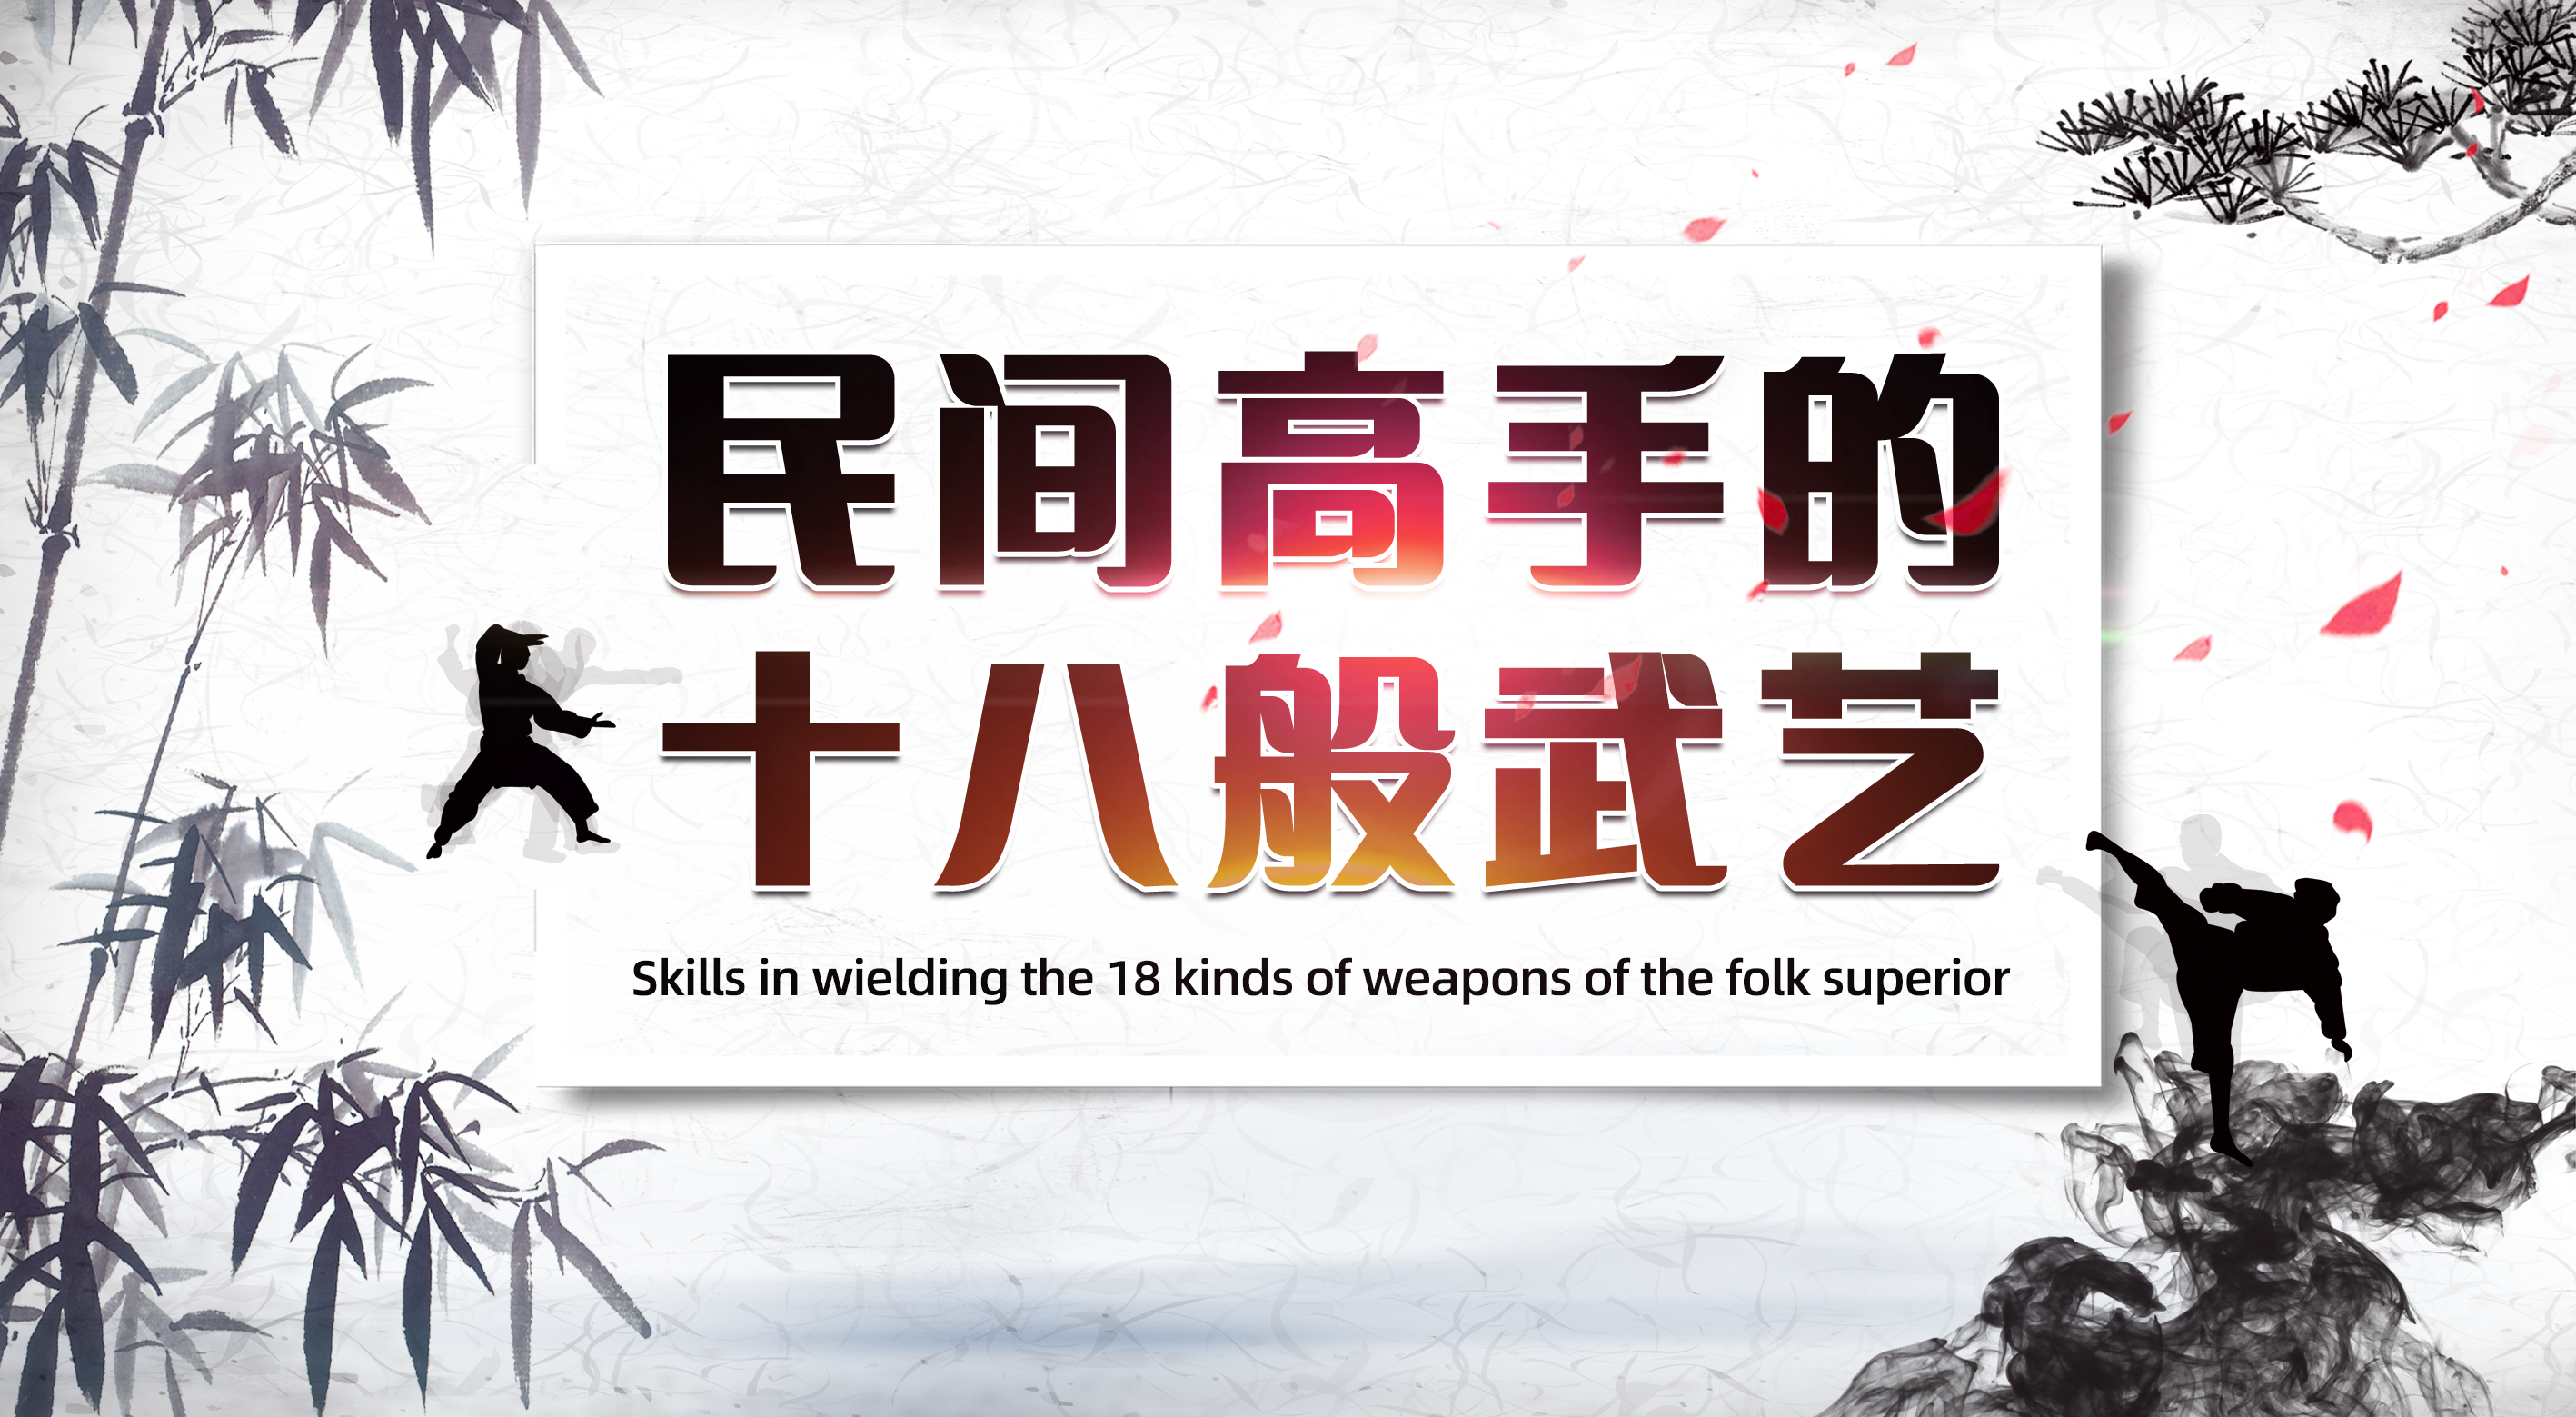 Skills in Wielding the 18 Kinds of Weapons of the Folk Superior